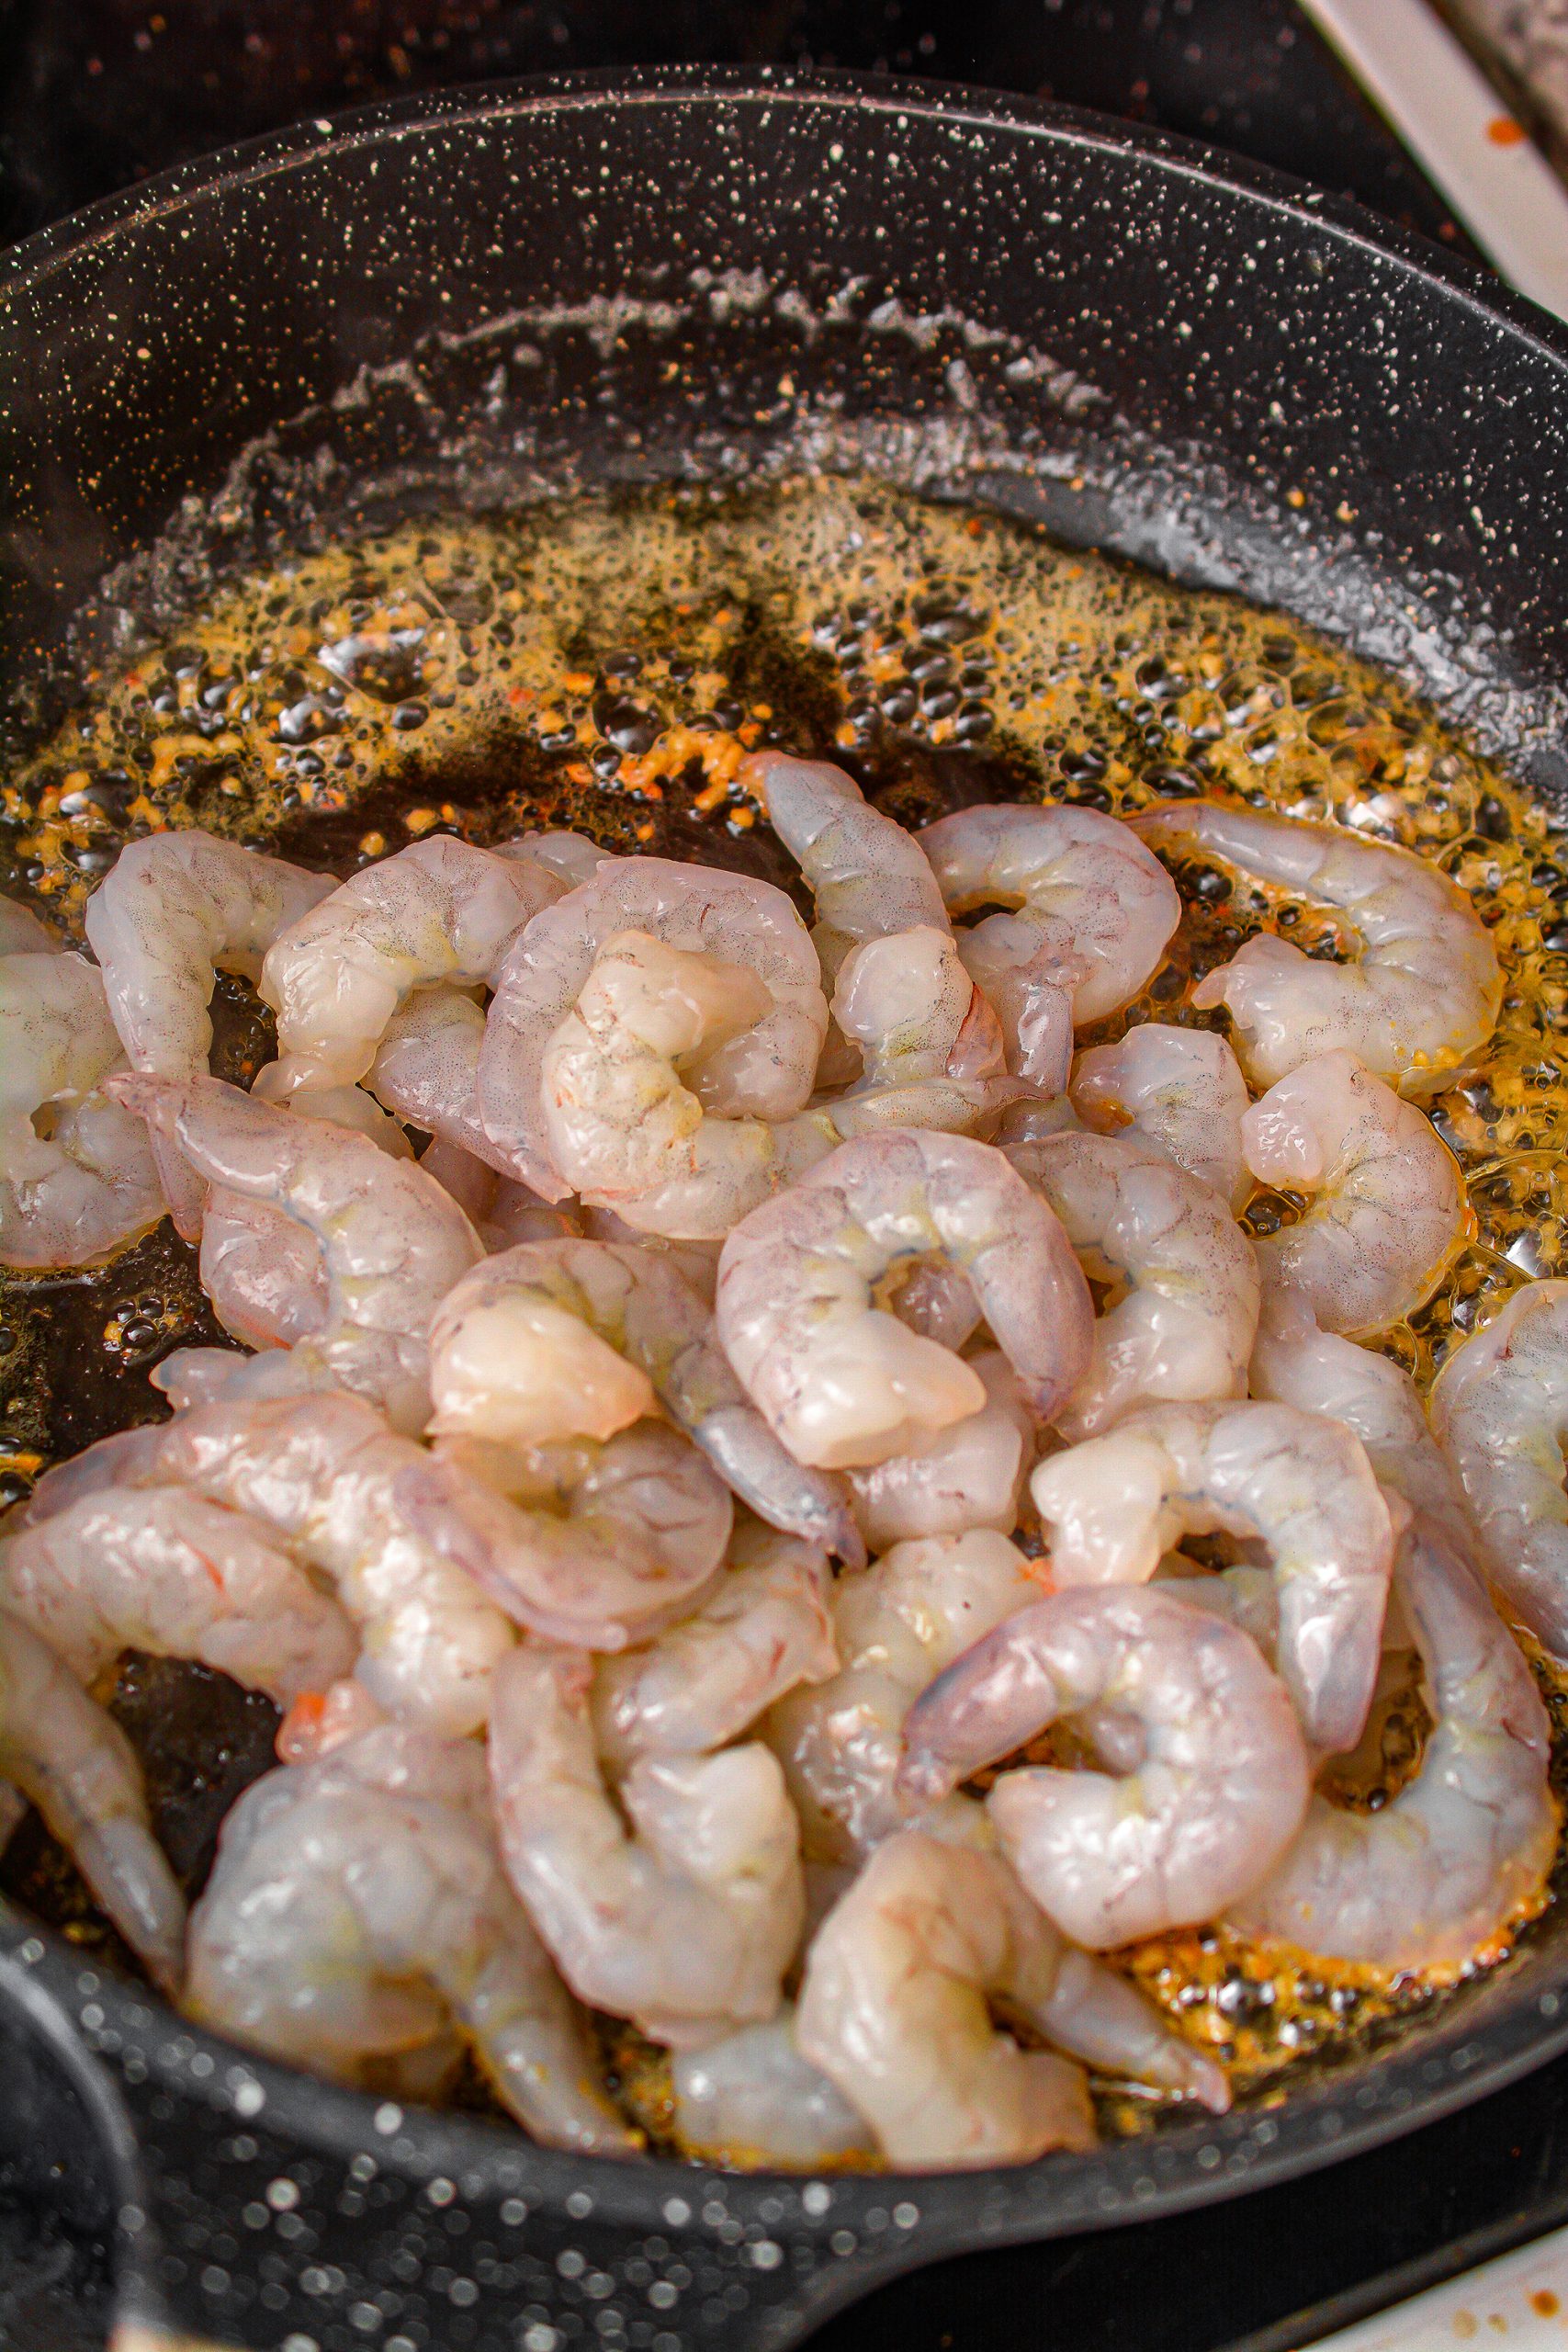 Add the shrimp to the skillet and saute for 2 minutes.